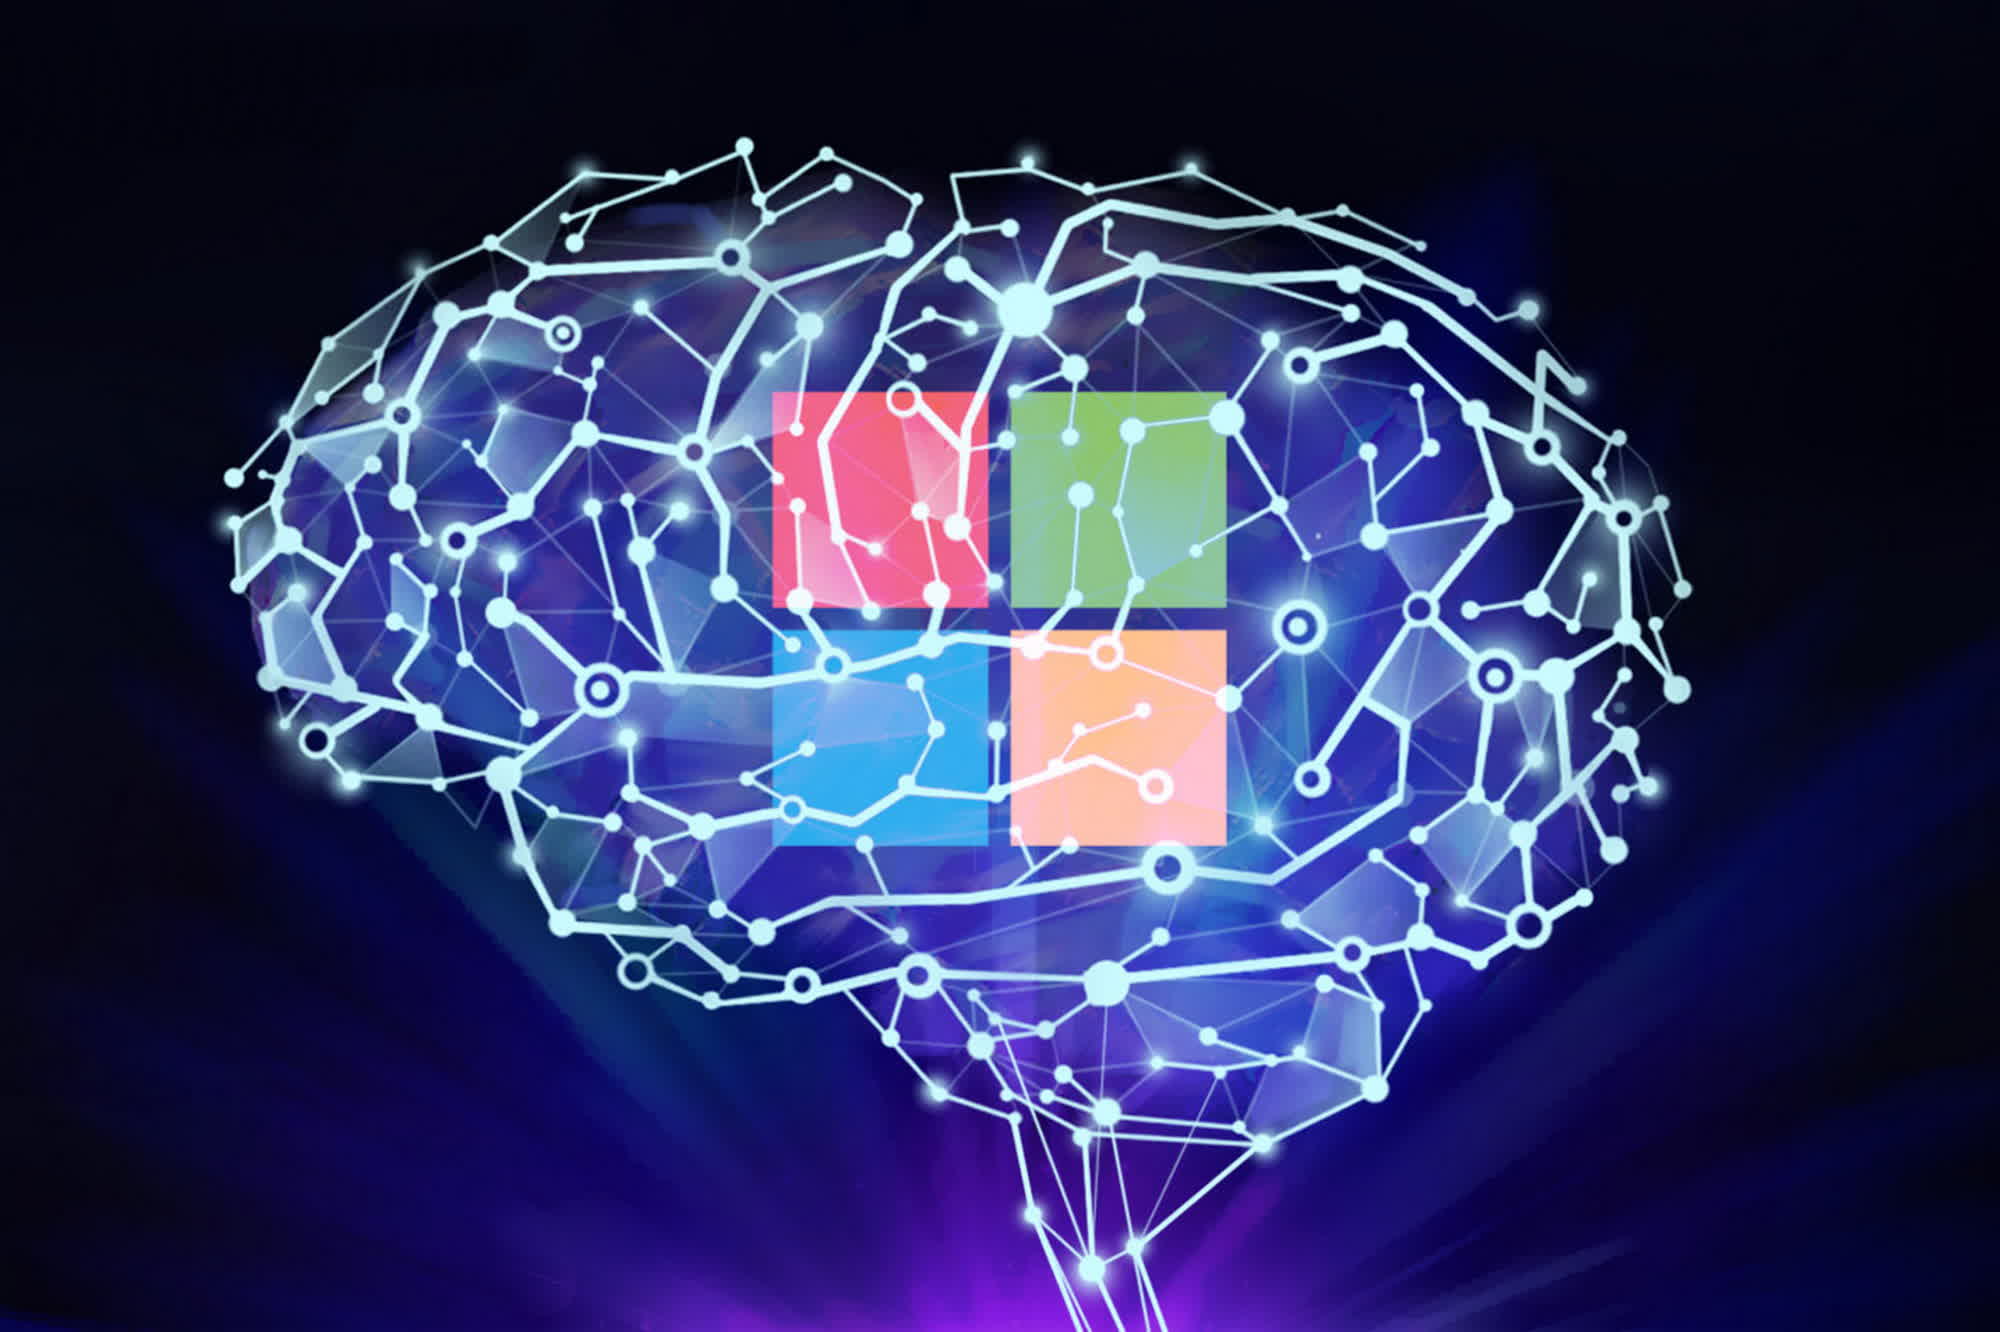 Microsoft exposed 38 terabytes of sensitive data while working on AI model